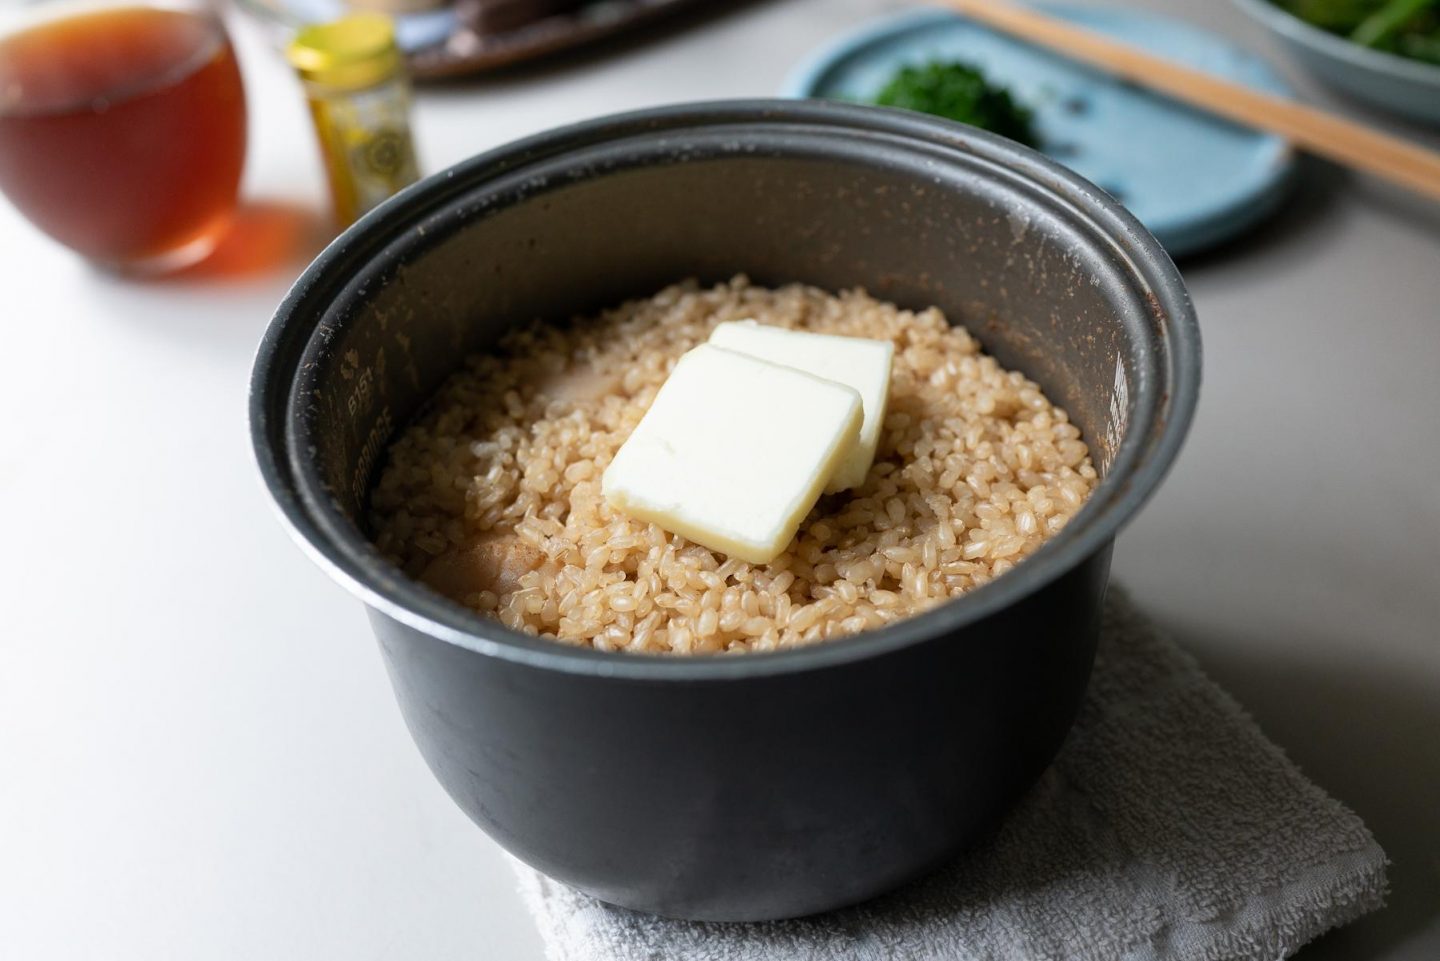 Adding butter to the scallop and rice in the rice cooker pot